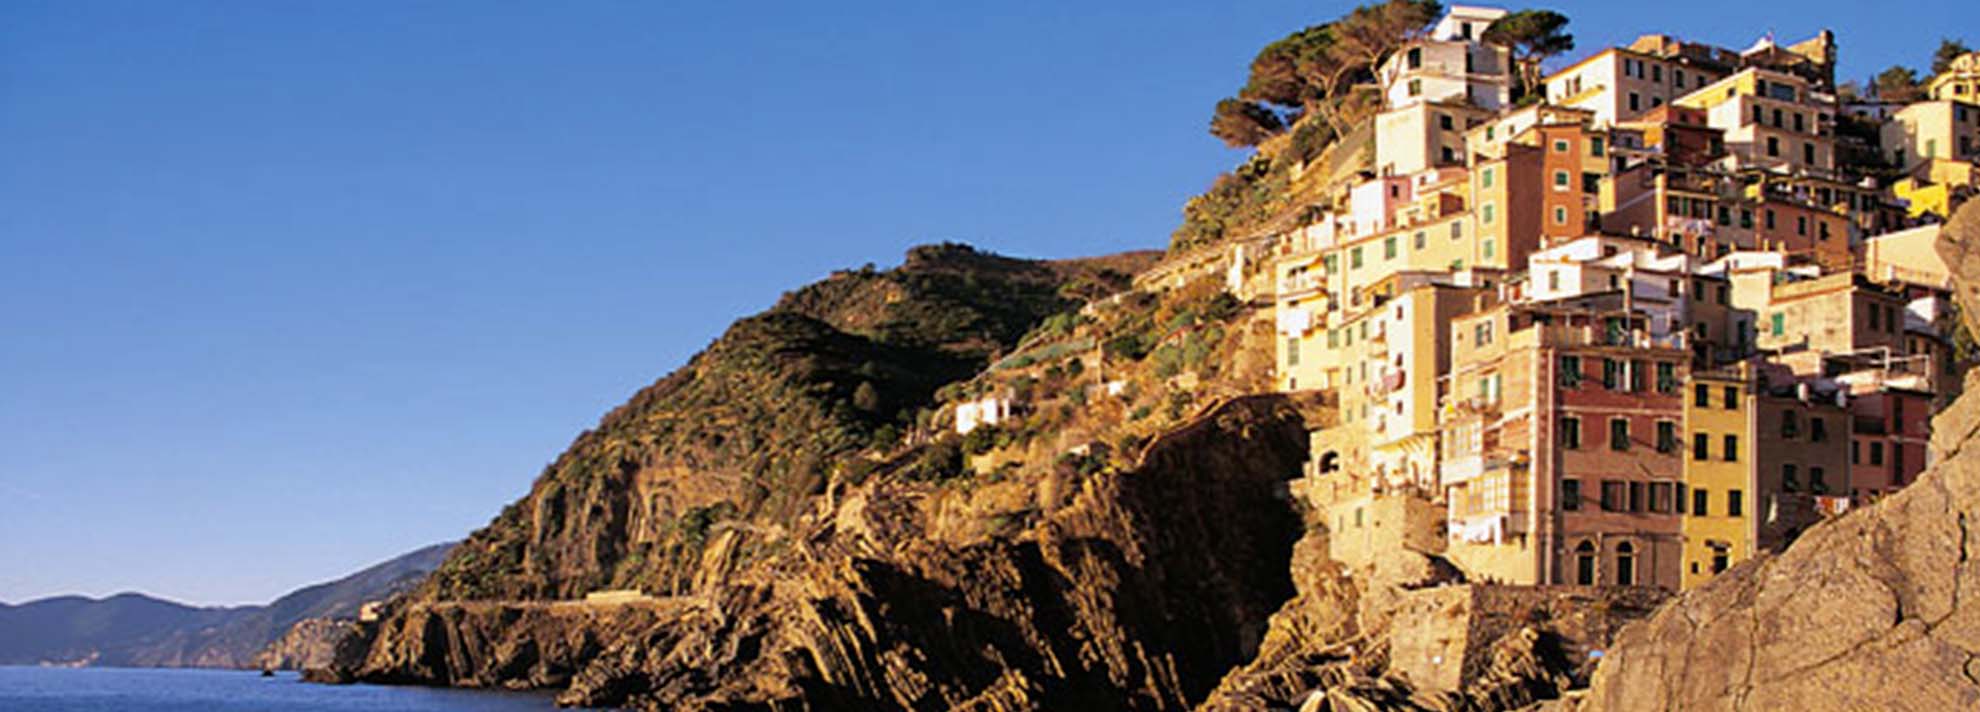 Riomaggiore Castle: a wonderful place to swear eternal love in the heart of the Cinque Terre